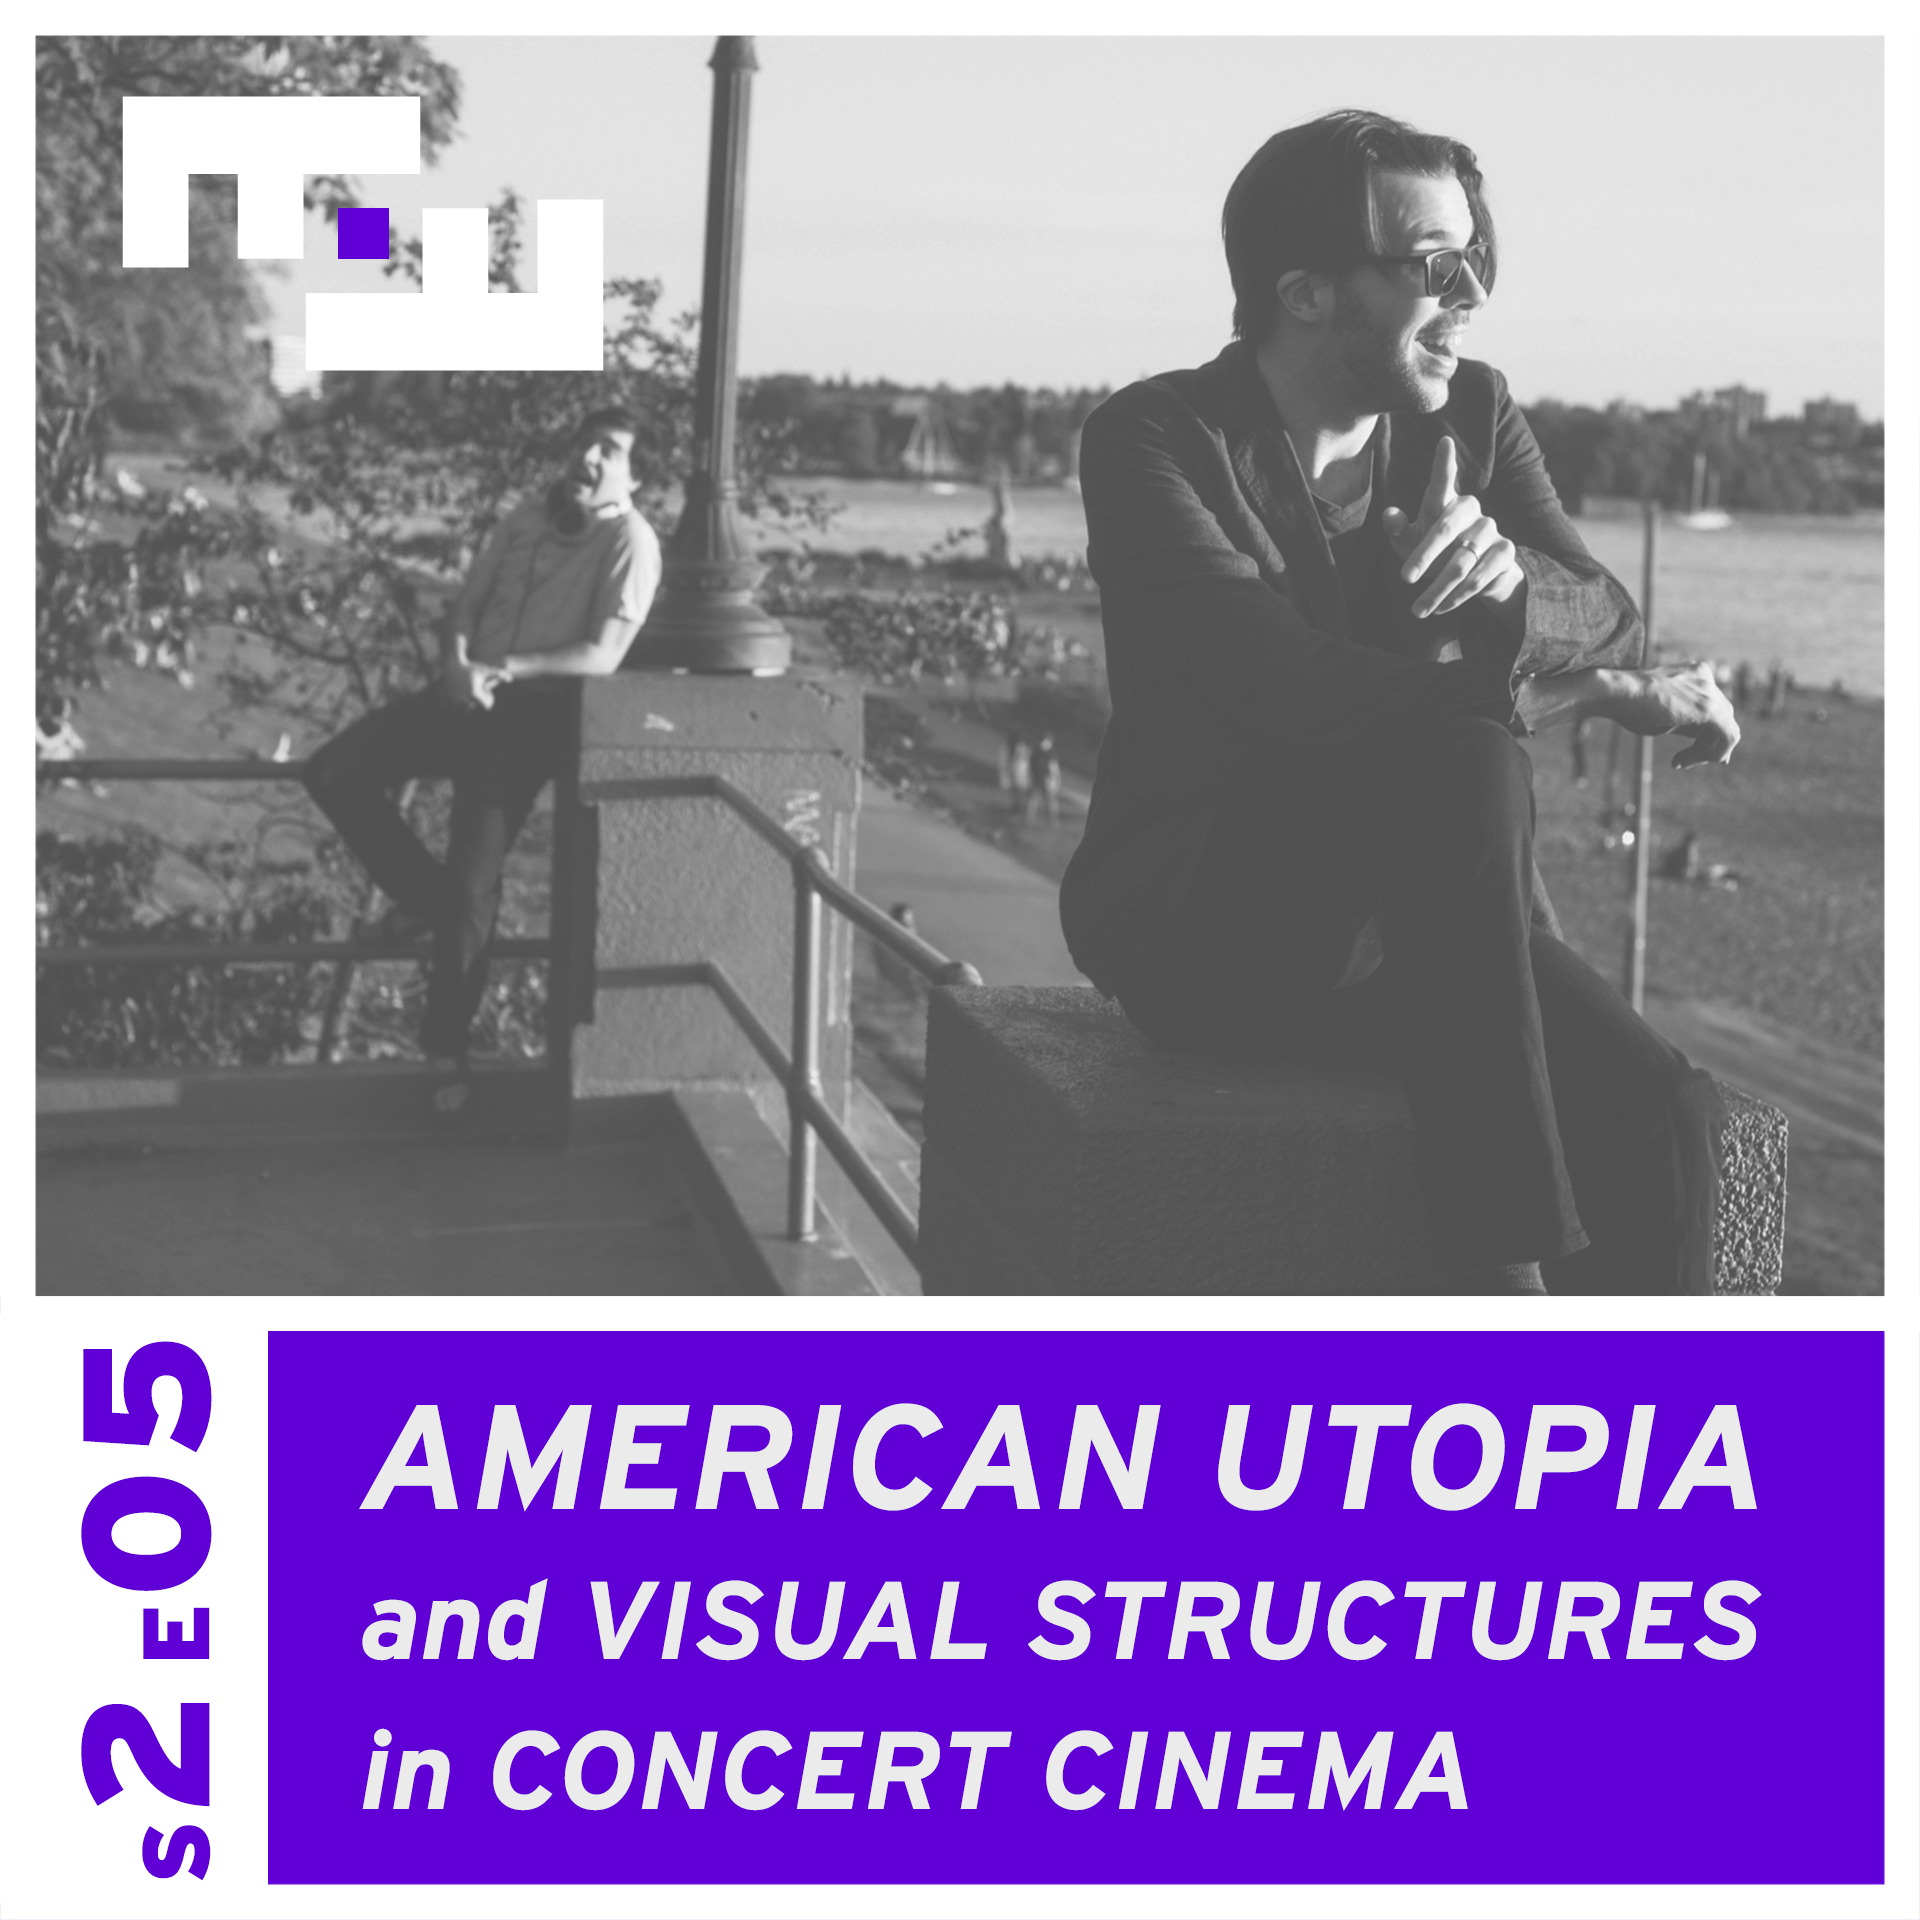 American Utopia and Visual Structures in Concert Cinema